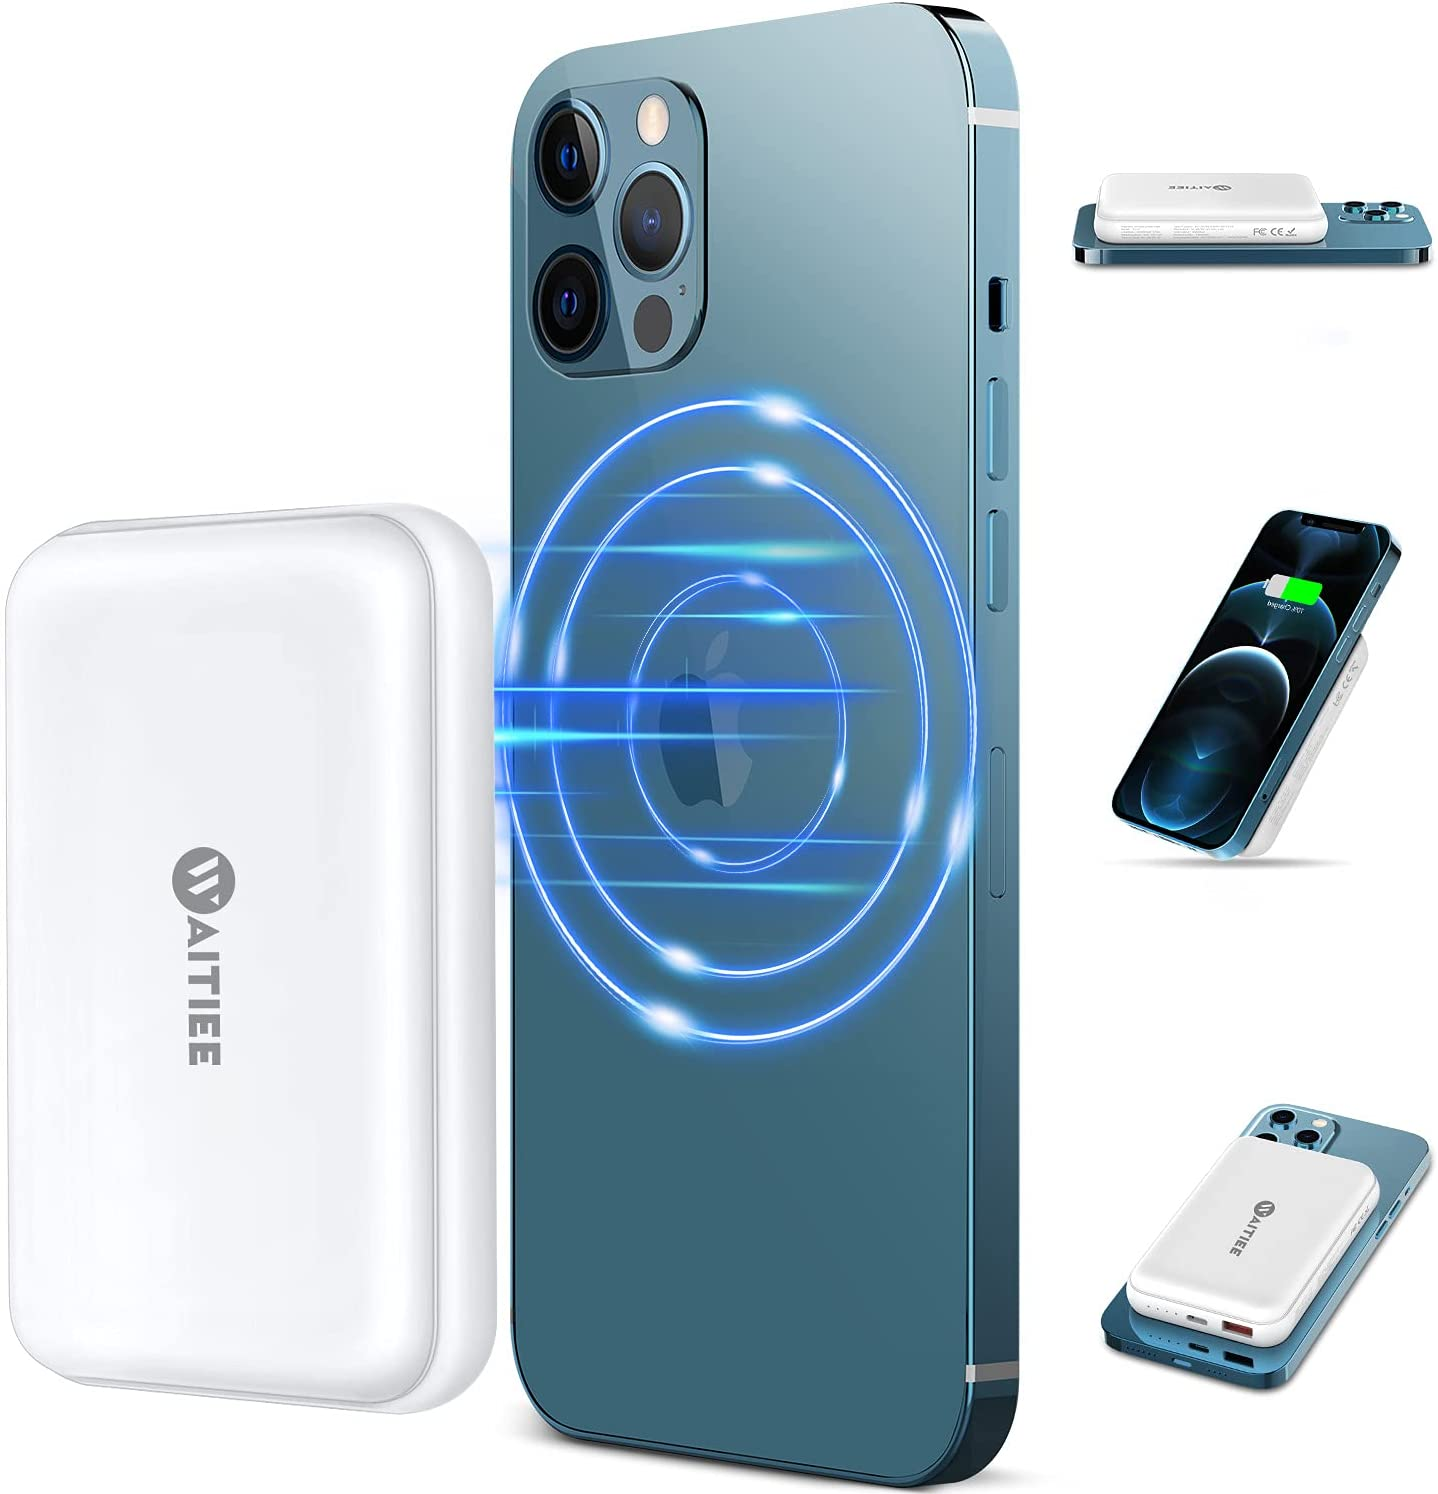 10,000 MPH Portable Charger, Magnetic Power Bank with USB-C Cable, Battery Pack, Fast Magnetic Wireless Portable Charger